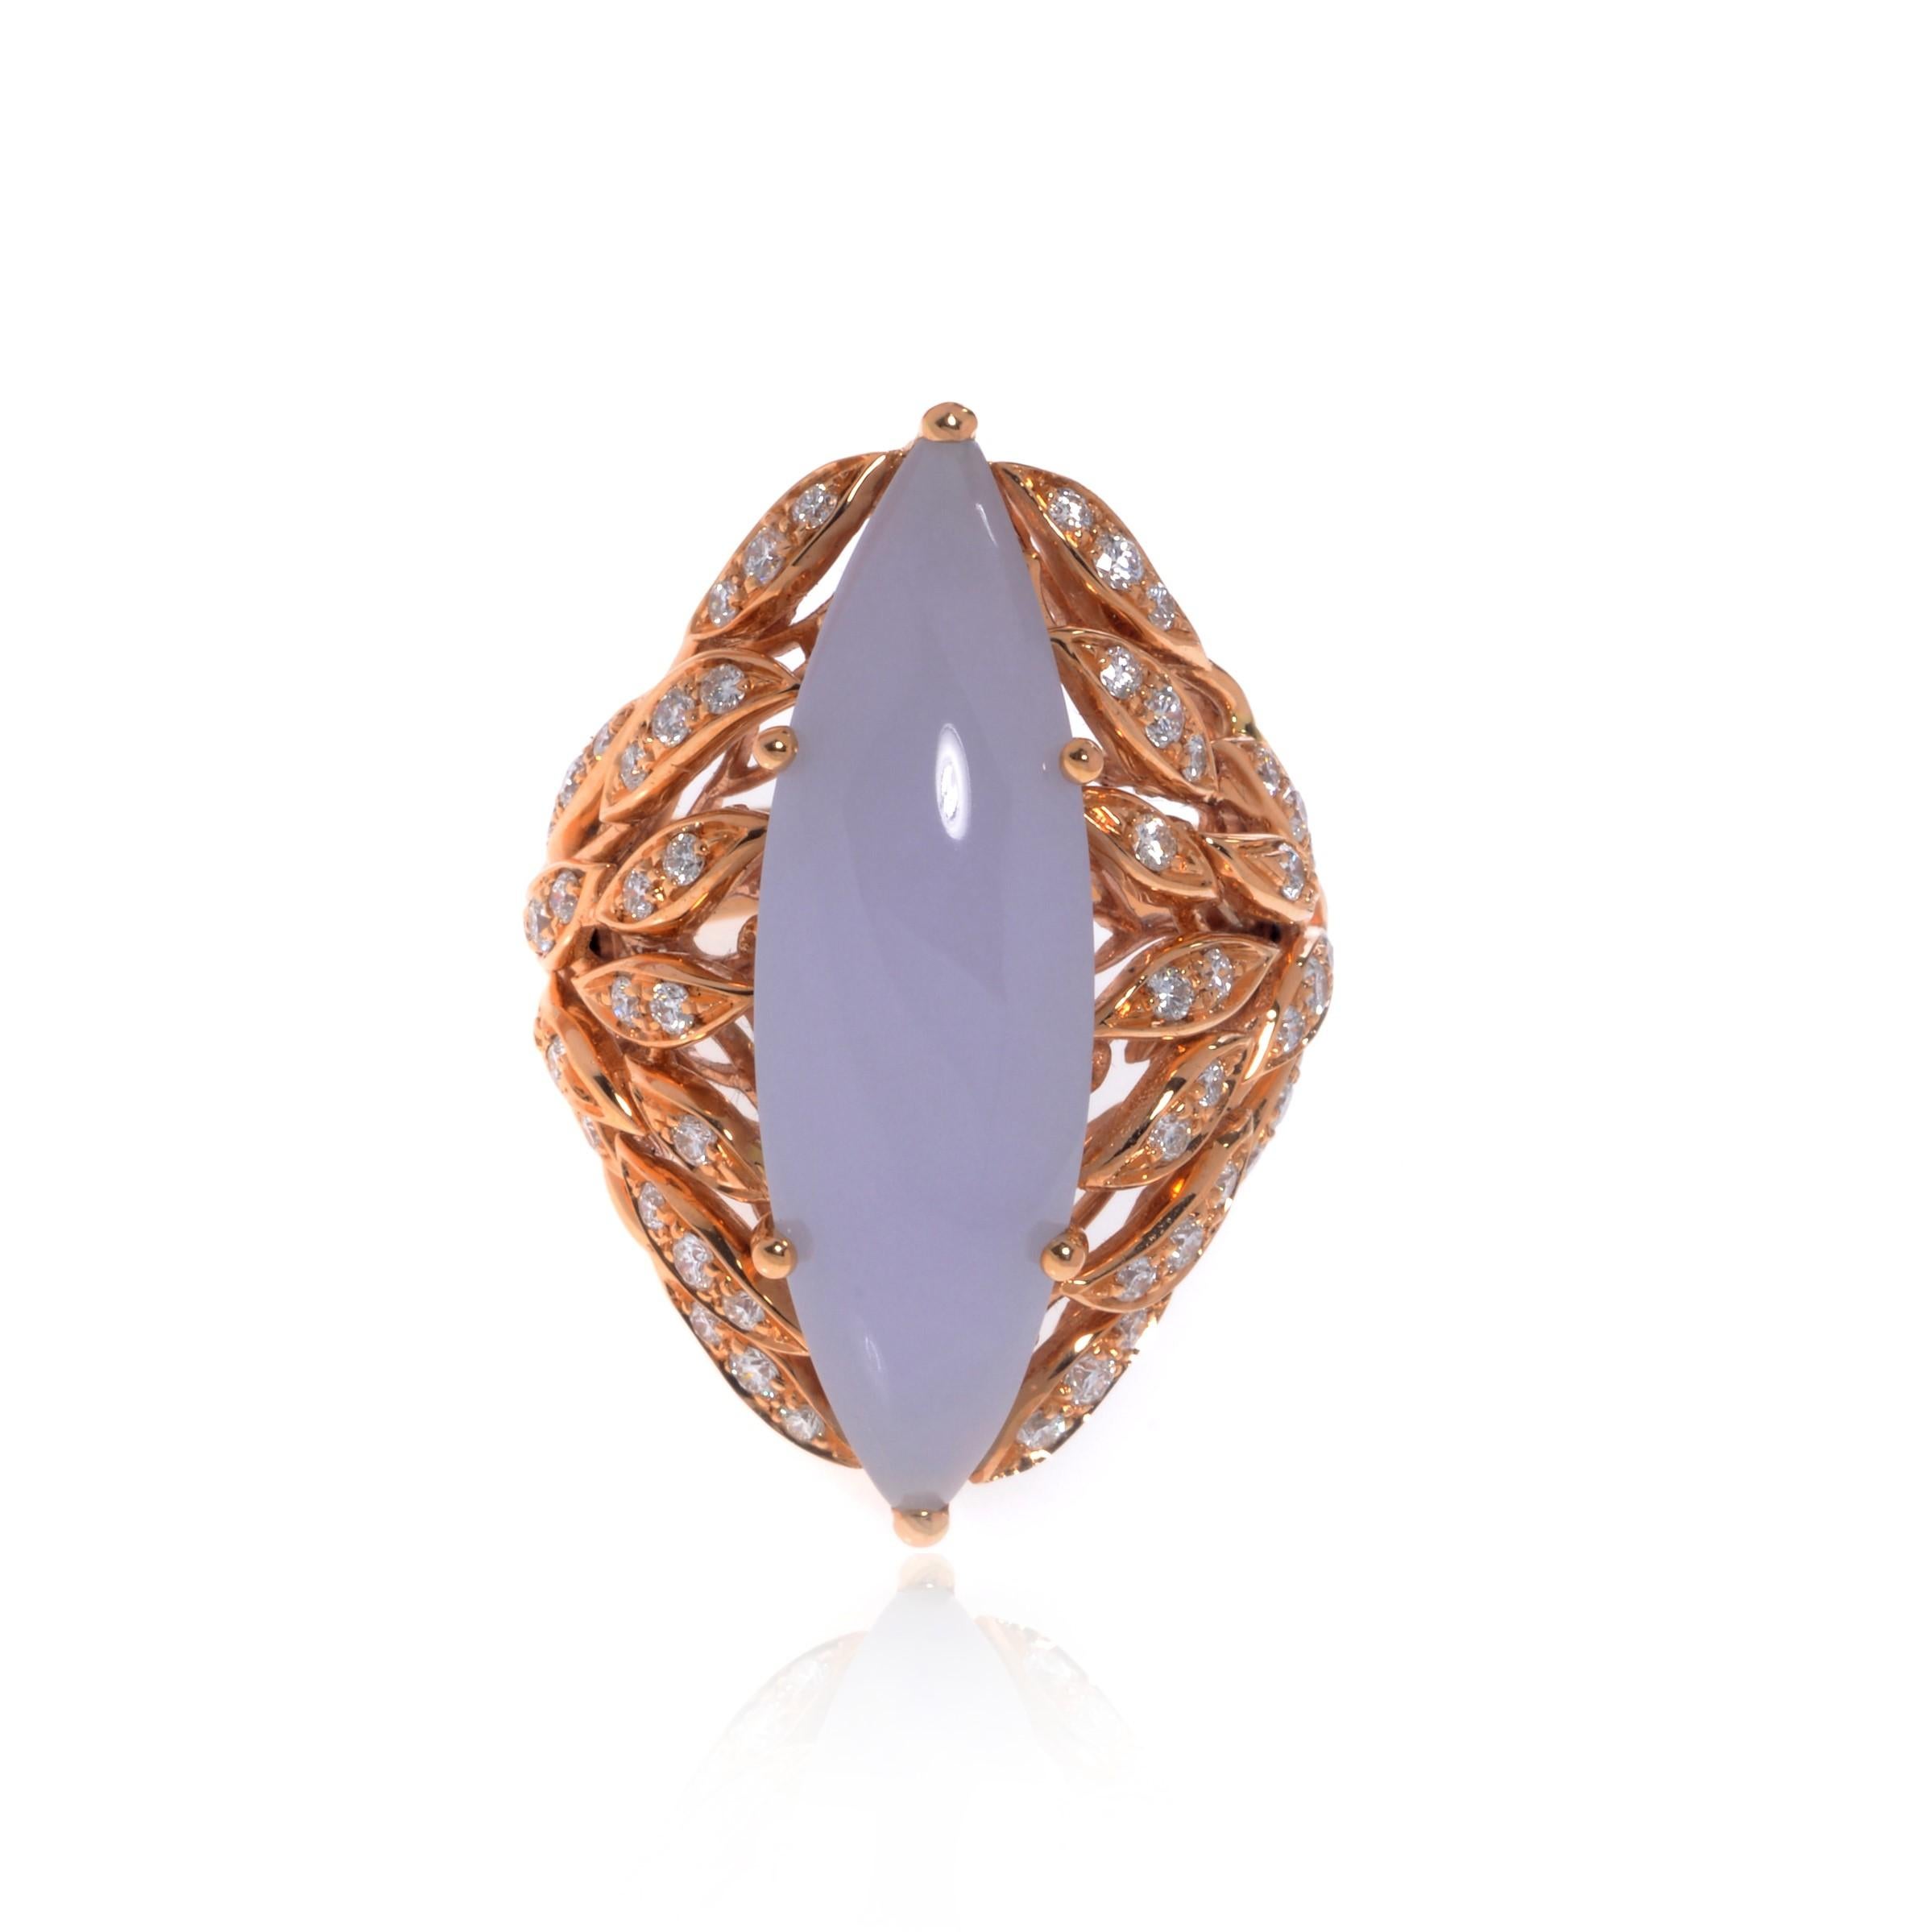 This beautiful cocktail ring features a large natural marquise shape Chalcedony in 18k rose gold. Set with 0.78cttw of brilliant cut diamonds. Diamond color G and VVS clarity. Chalcedony weights 2.40 grams. Ring size 6.5. Top measurements: 32.00mm.